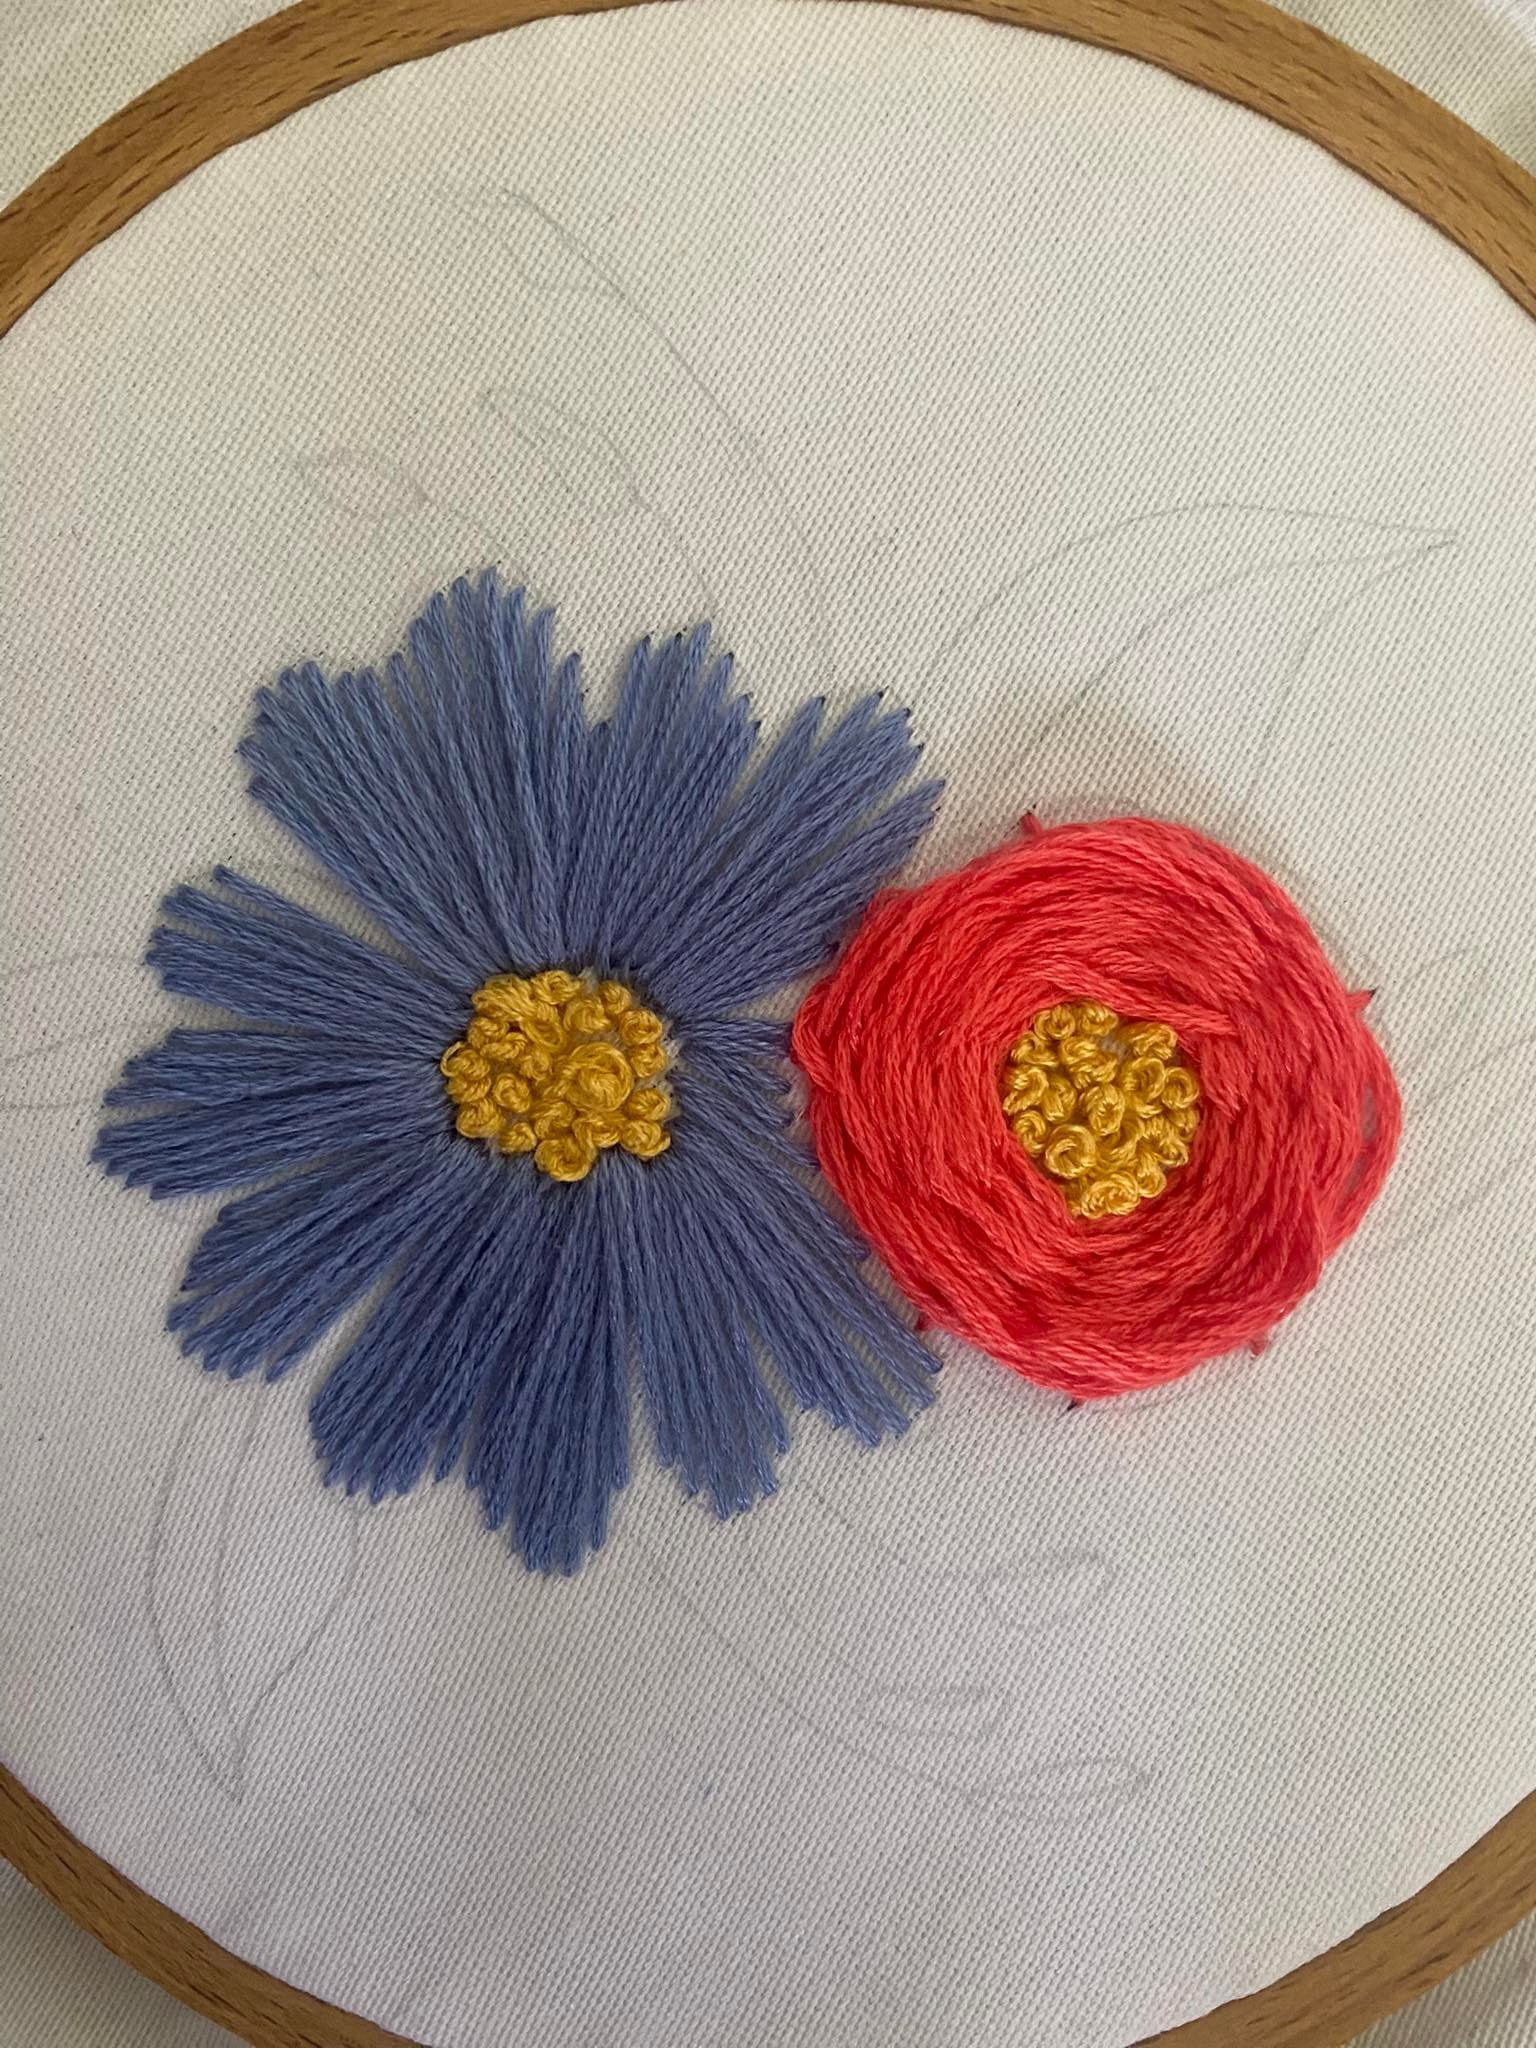 free-floral-embroidery-pattern-a-step-by-step-tutorial-easy-for